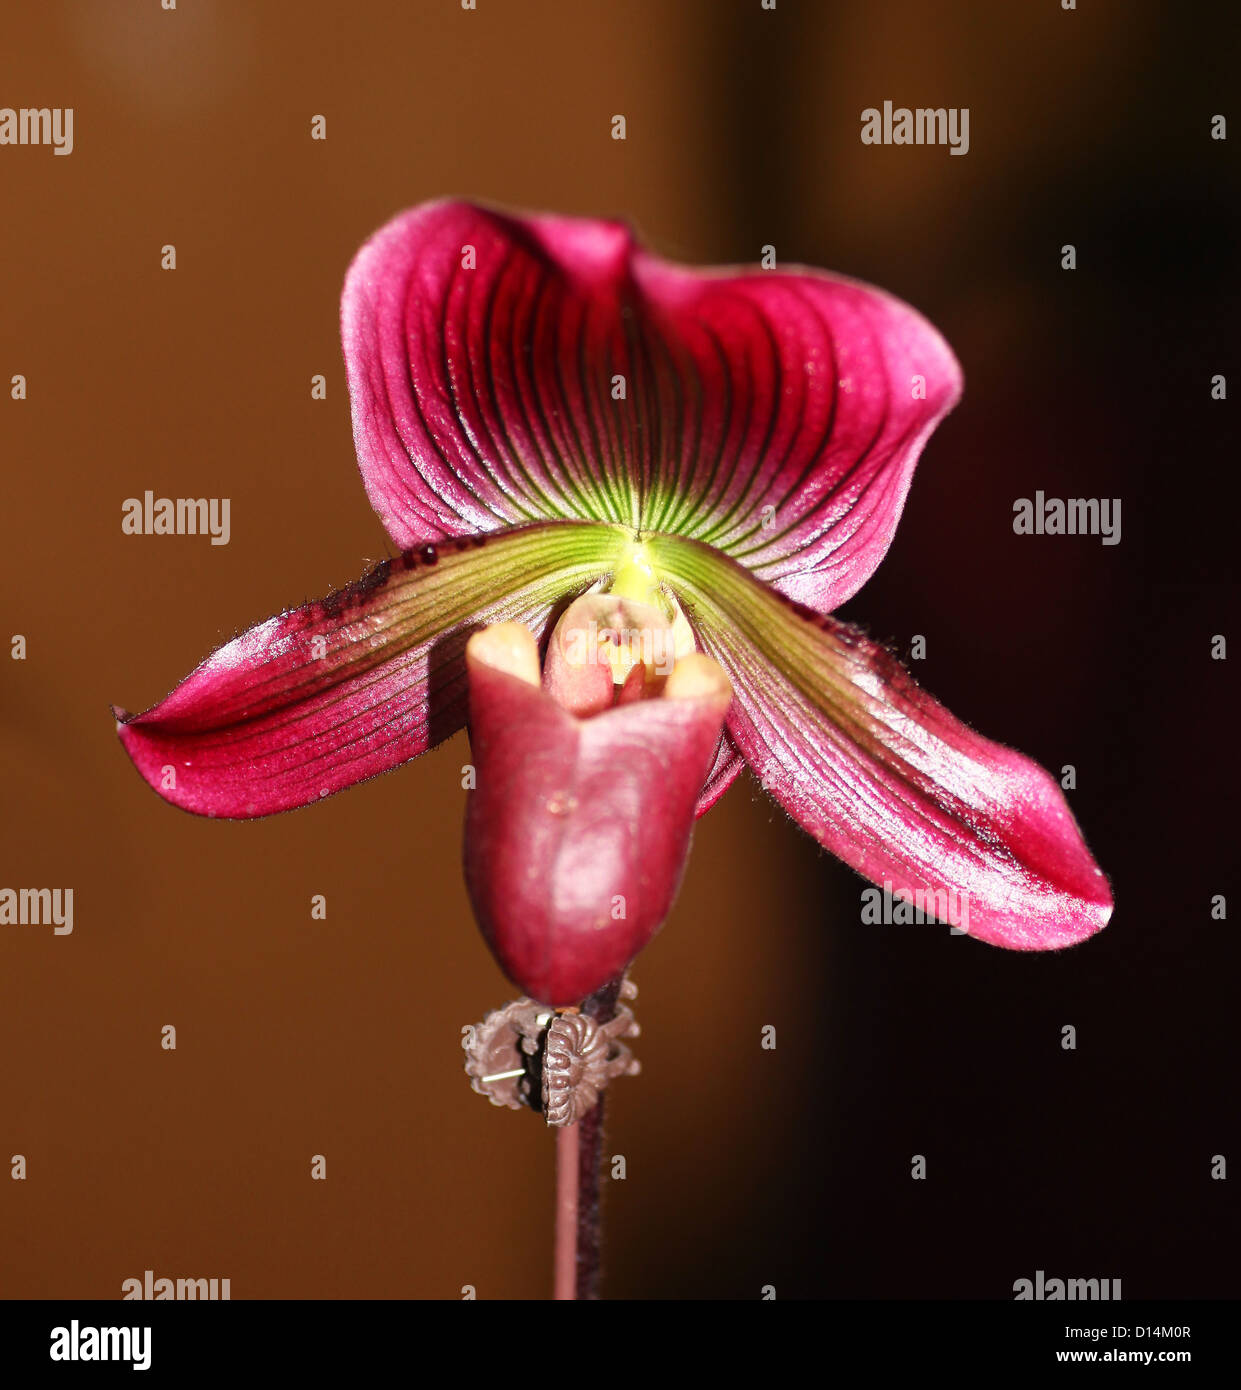 Paphiopedilum Hung Sheng 'Red Apple' Slipper Orchid flower Stock Photo